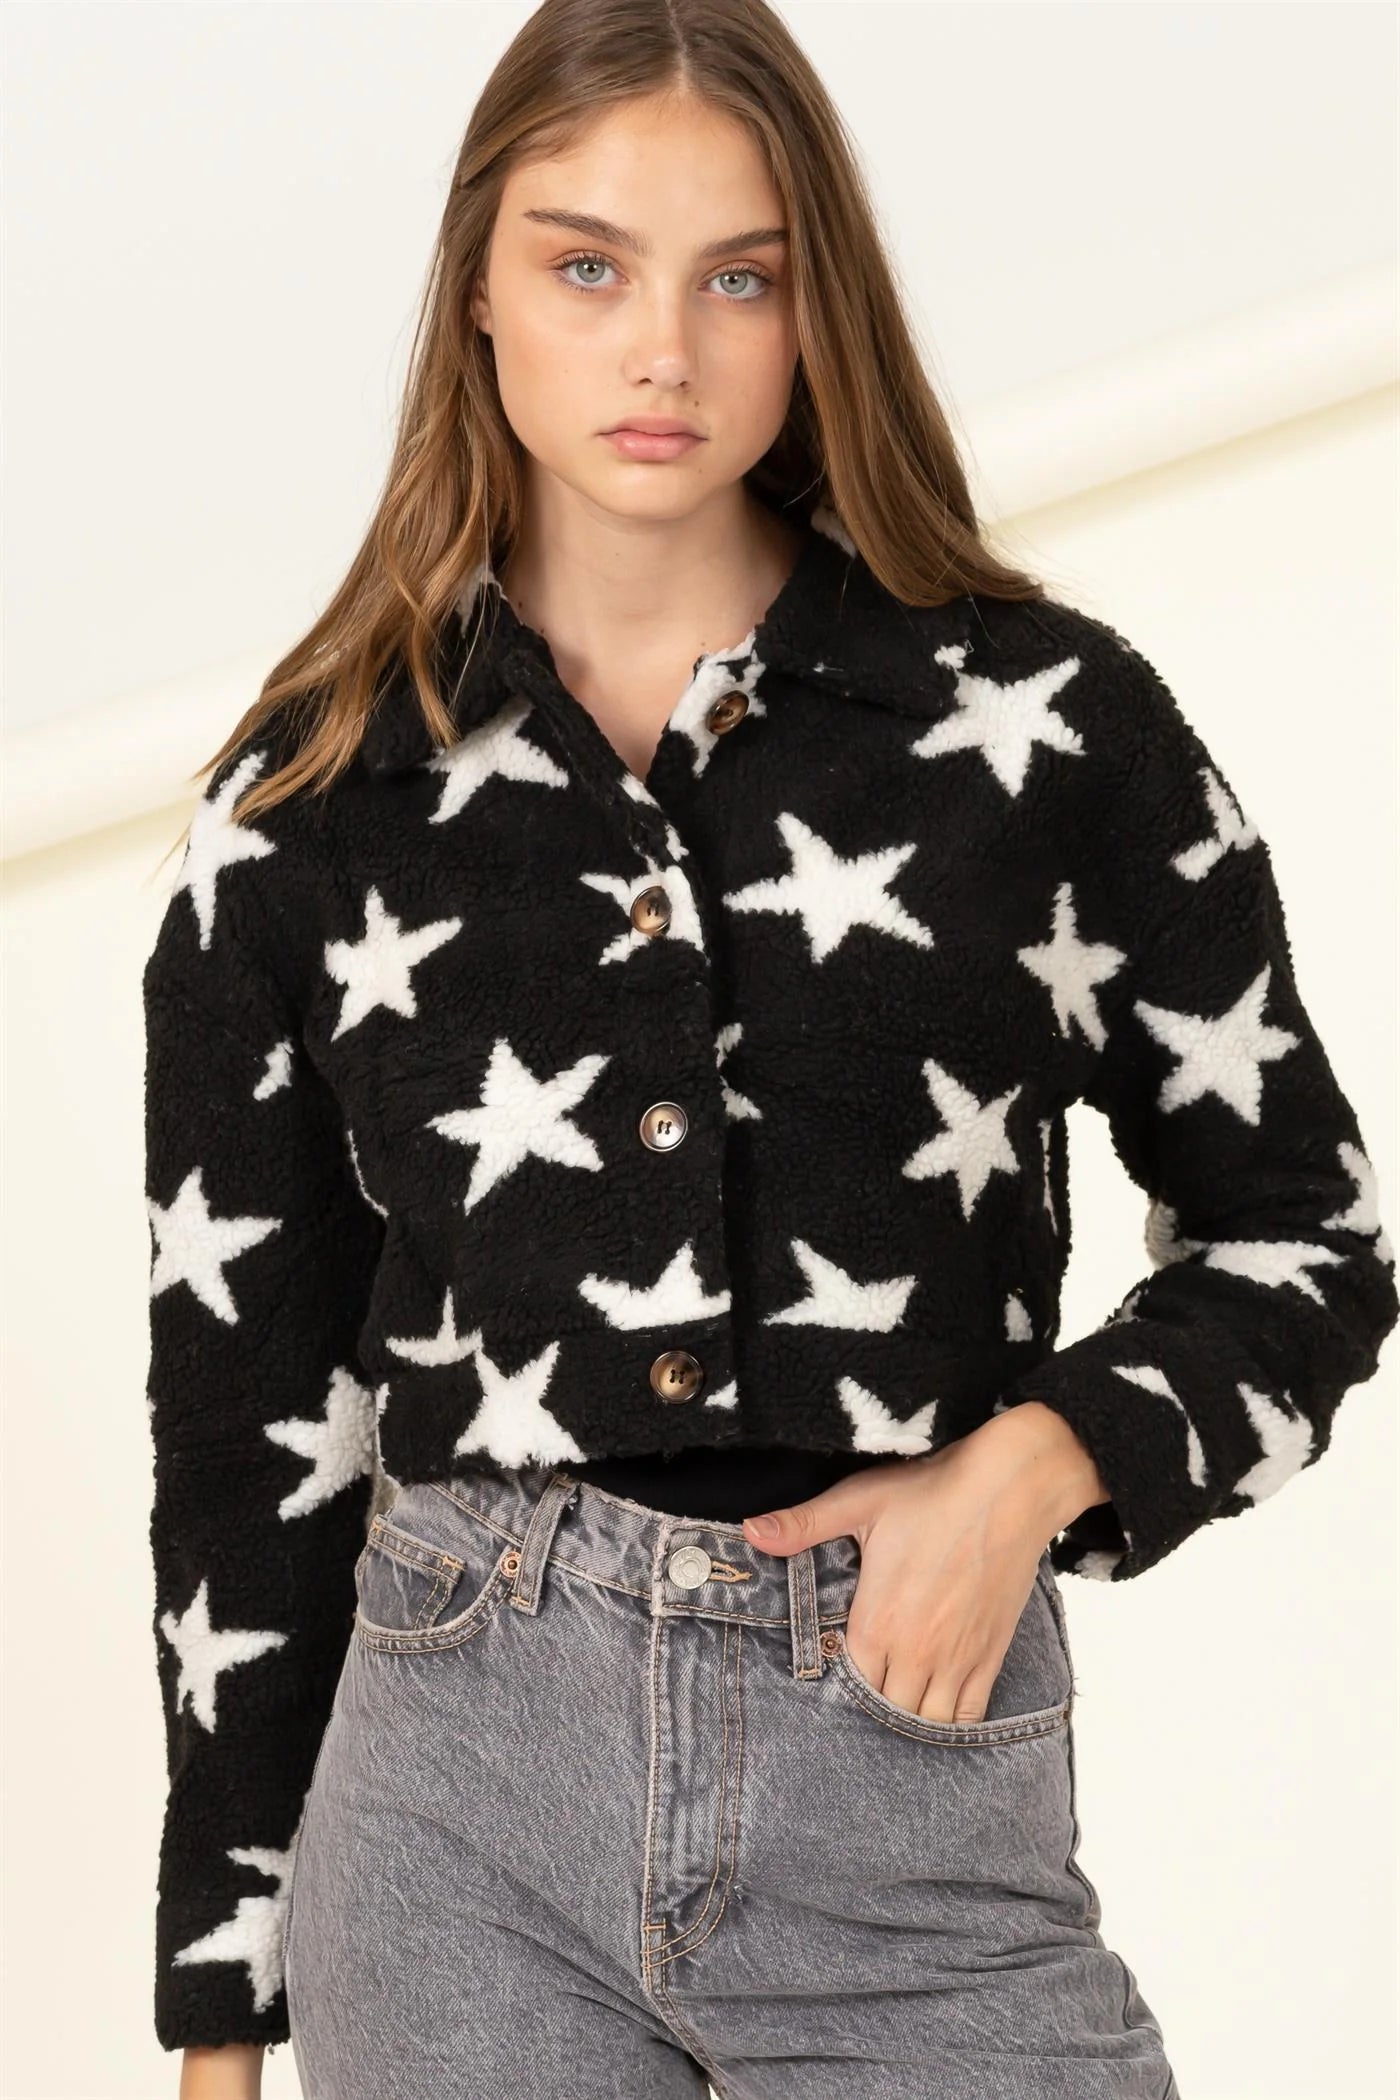 Star Cropped Jacket